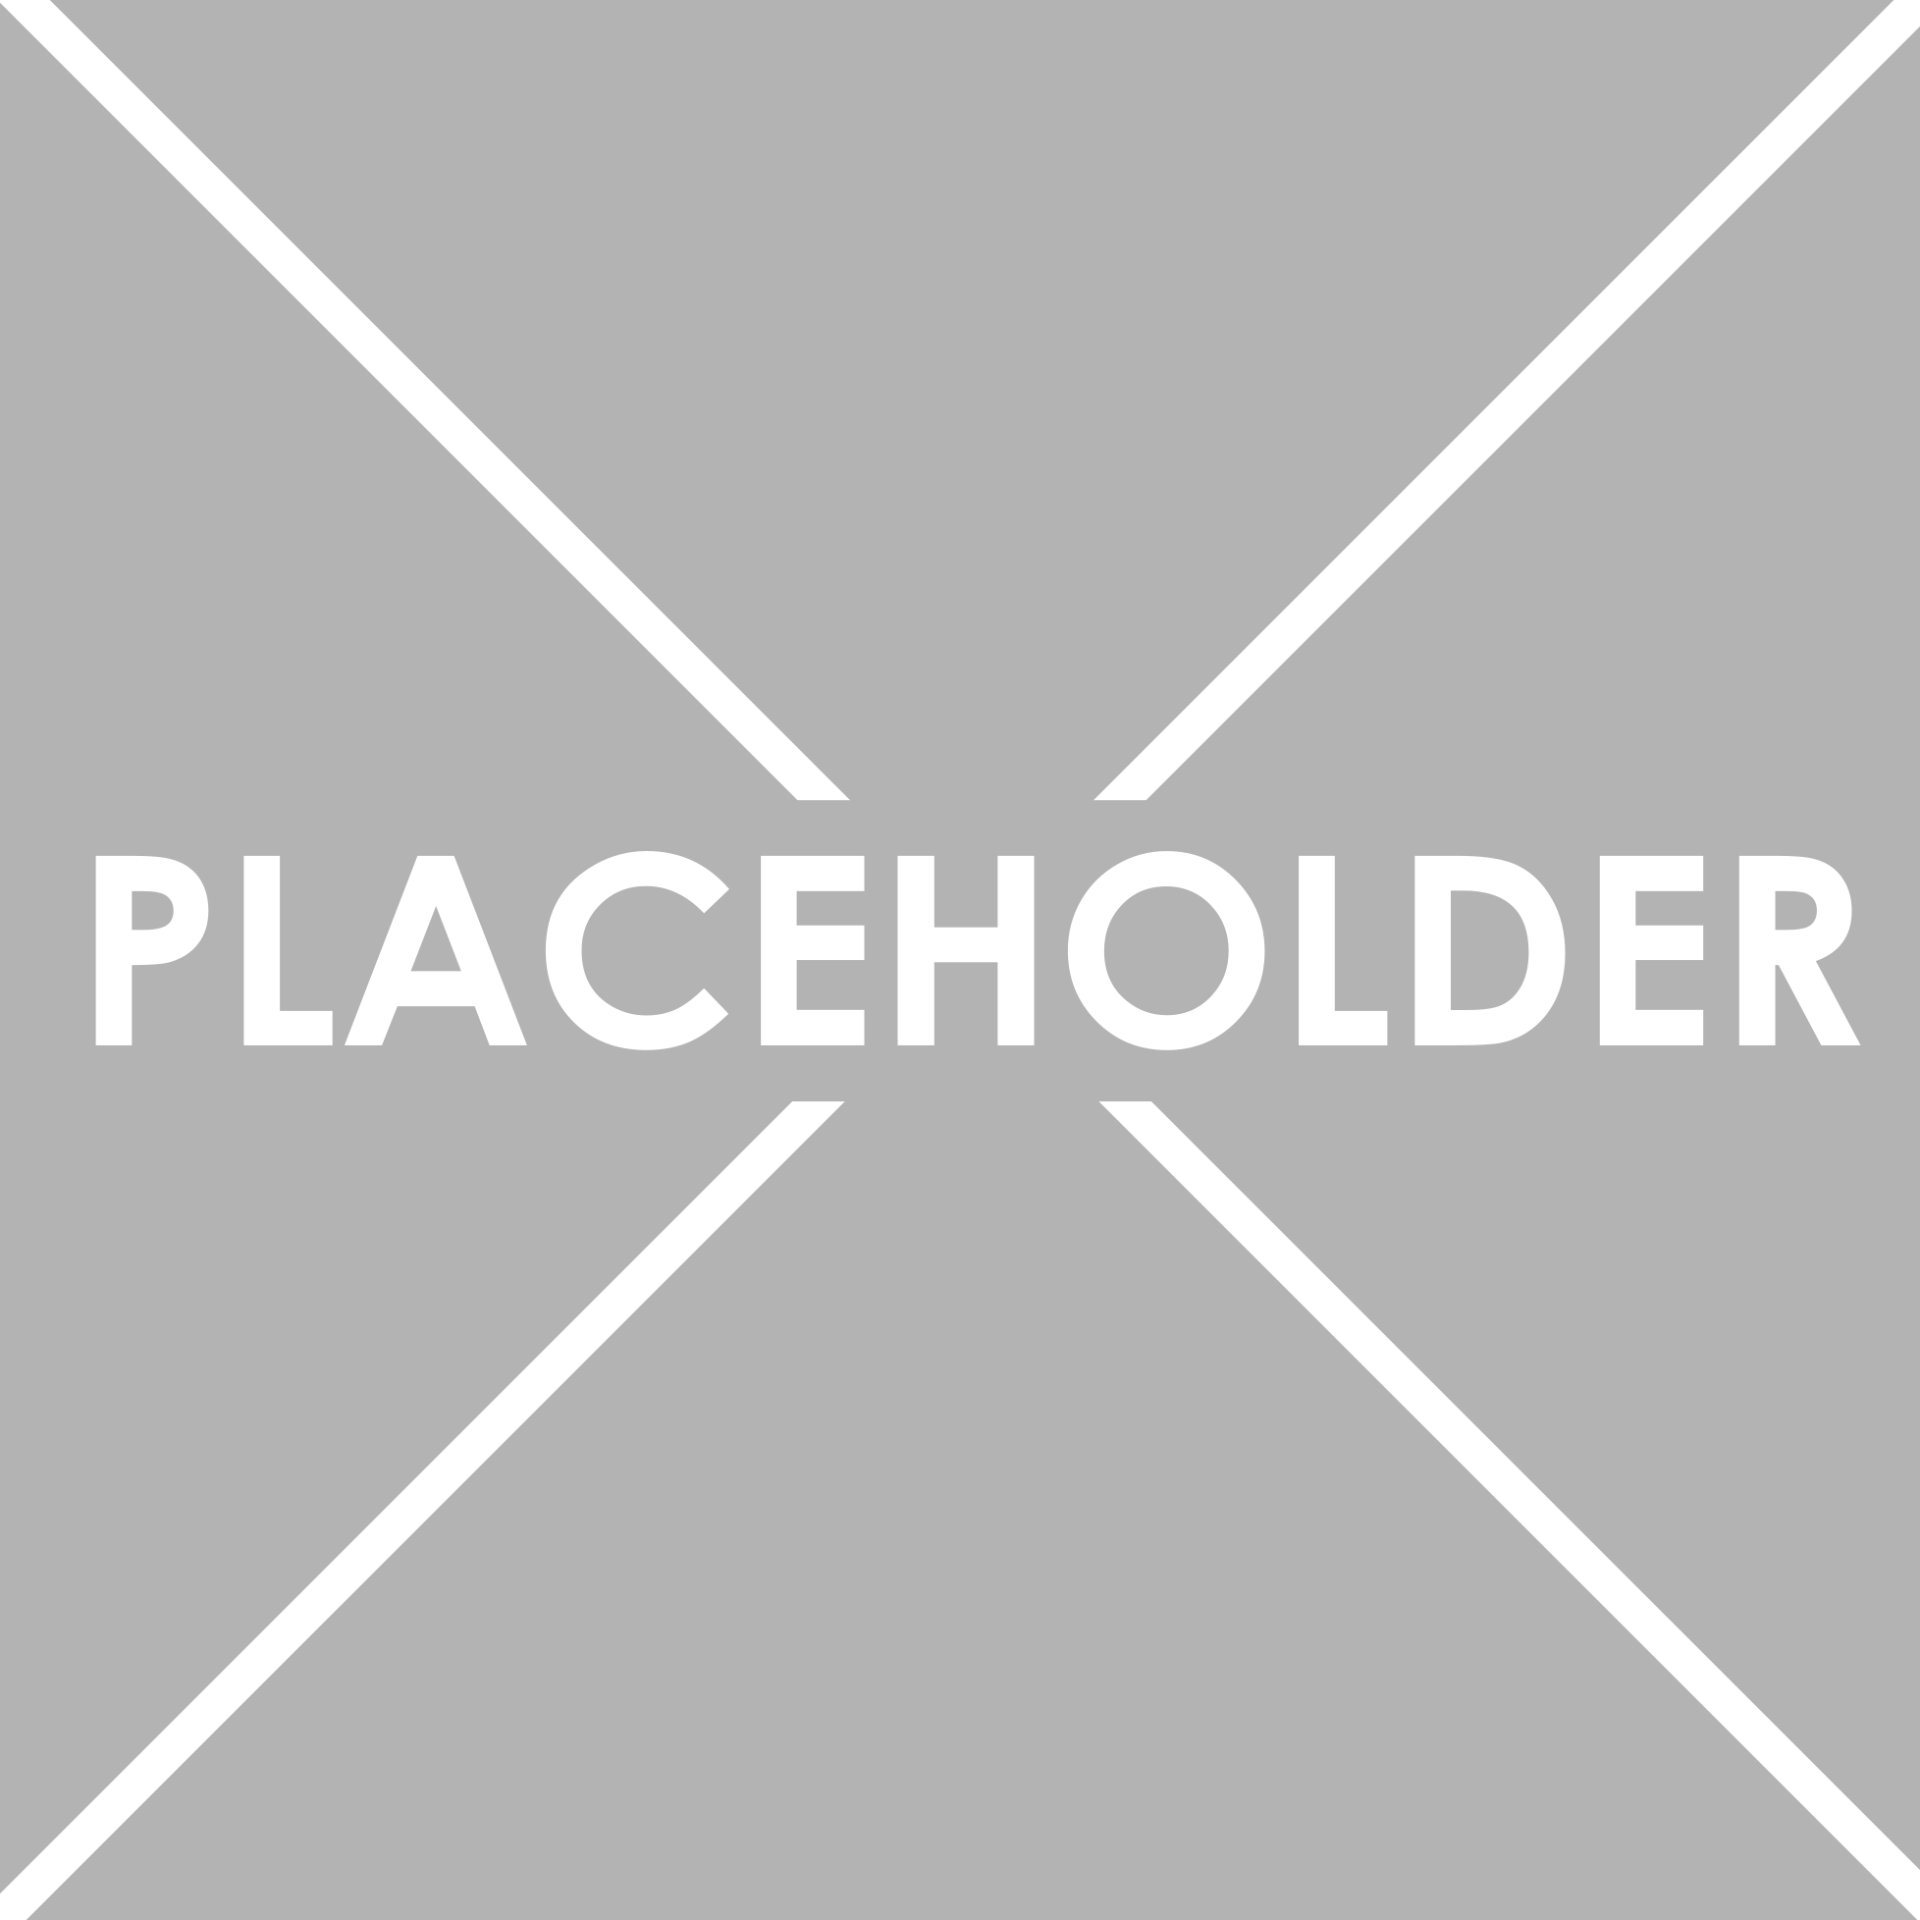 placeholder-1-e1533569576673.png